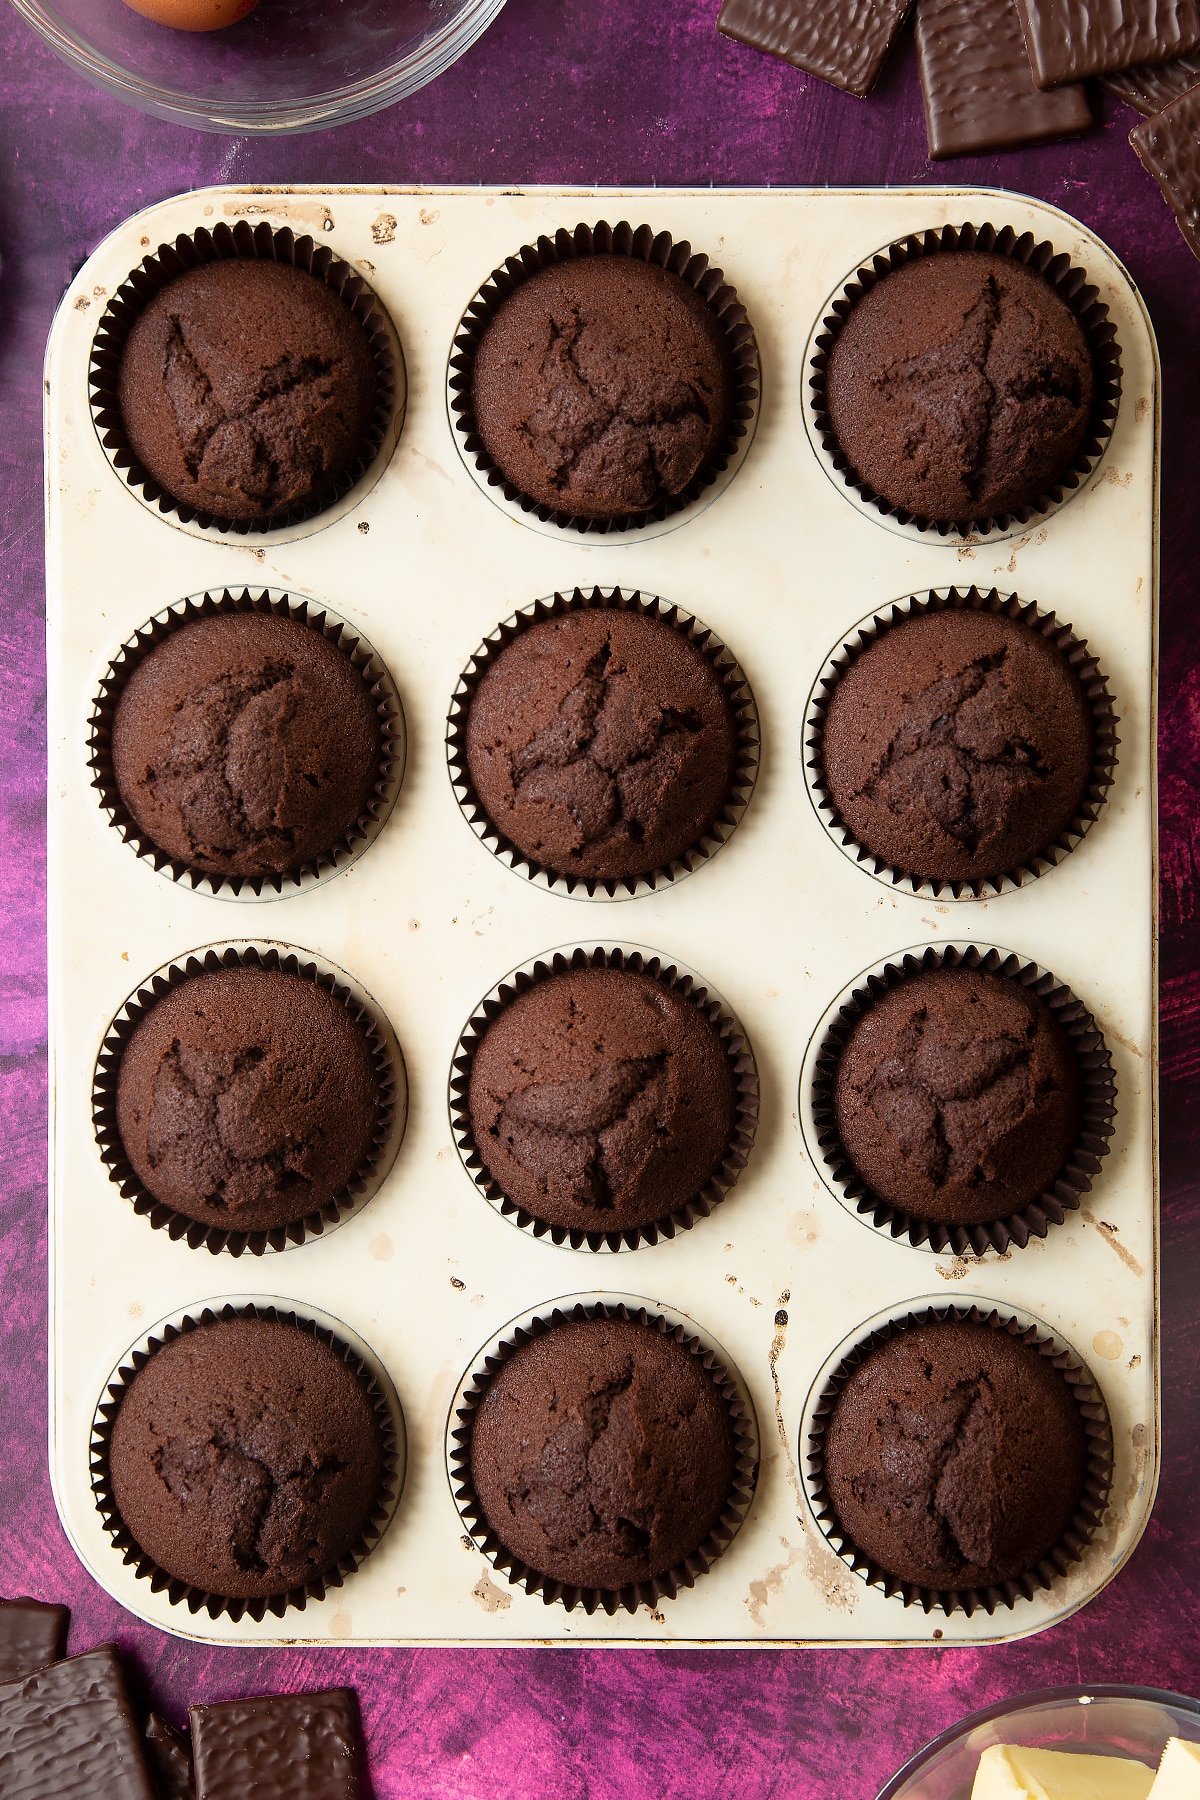 Baked chocolate cupcakes in a 12 hole muffin tray. Ingredients to make After Eight cupcakes surround the tray.